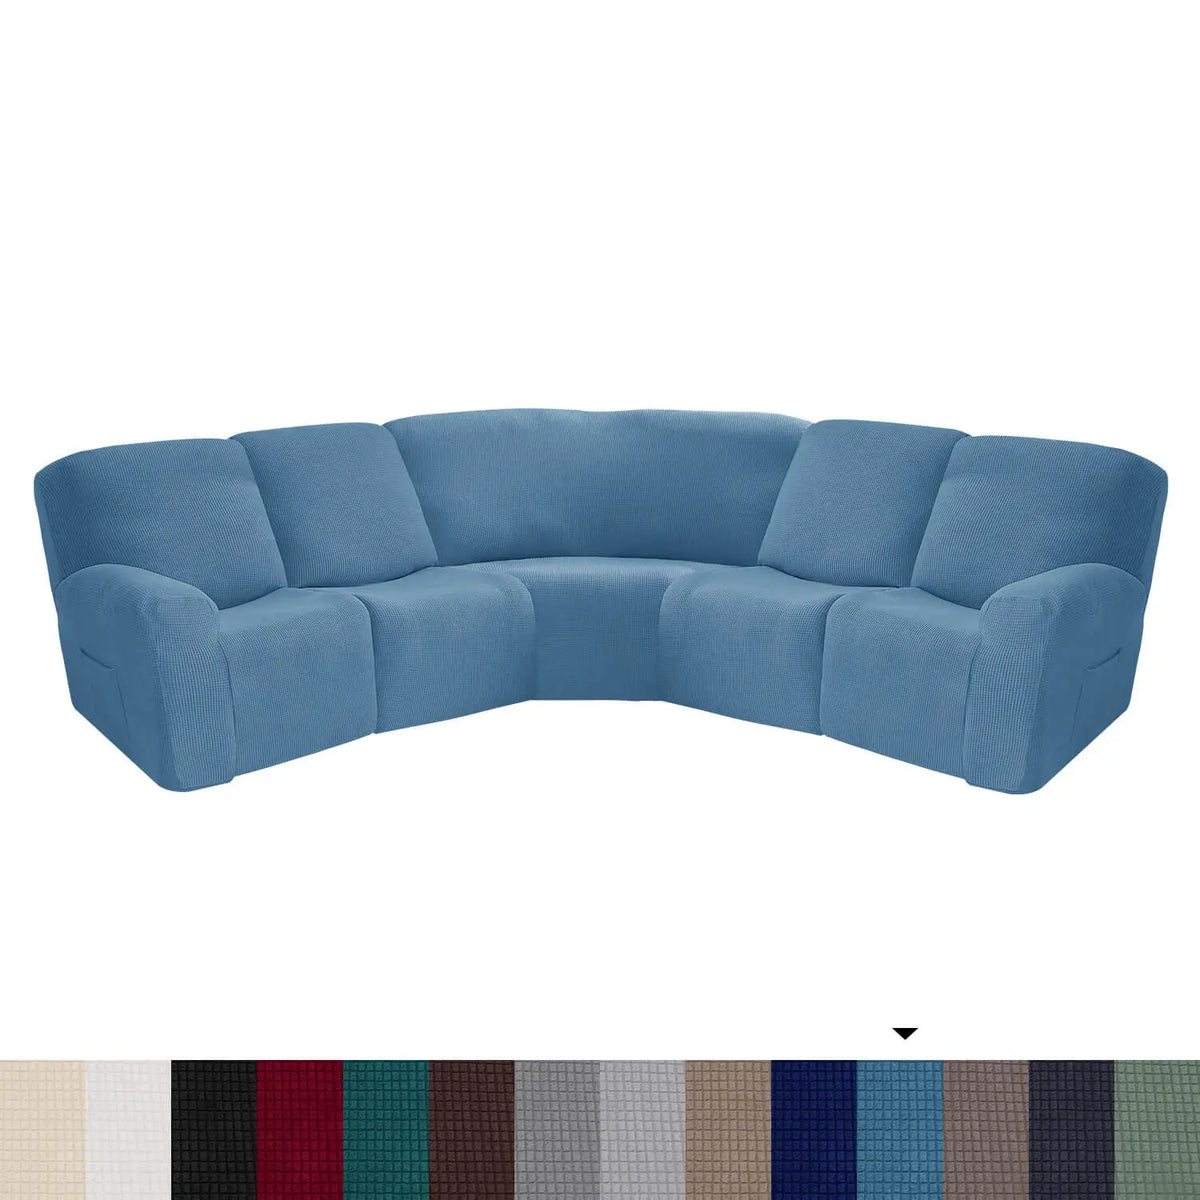 Crfatop L Shape Sectional Recliner Sofa Covers Corner Couch Covers Sky-Blue